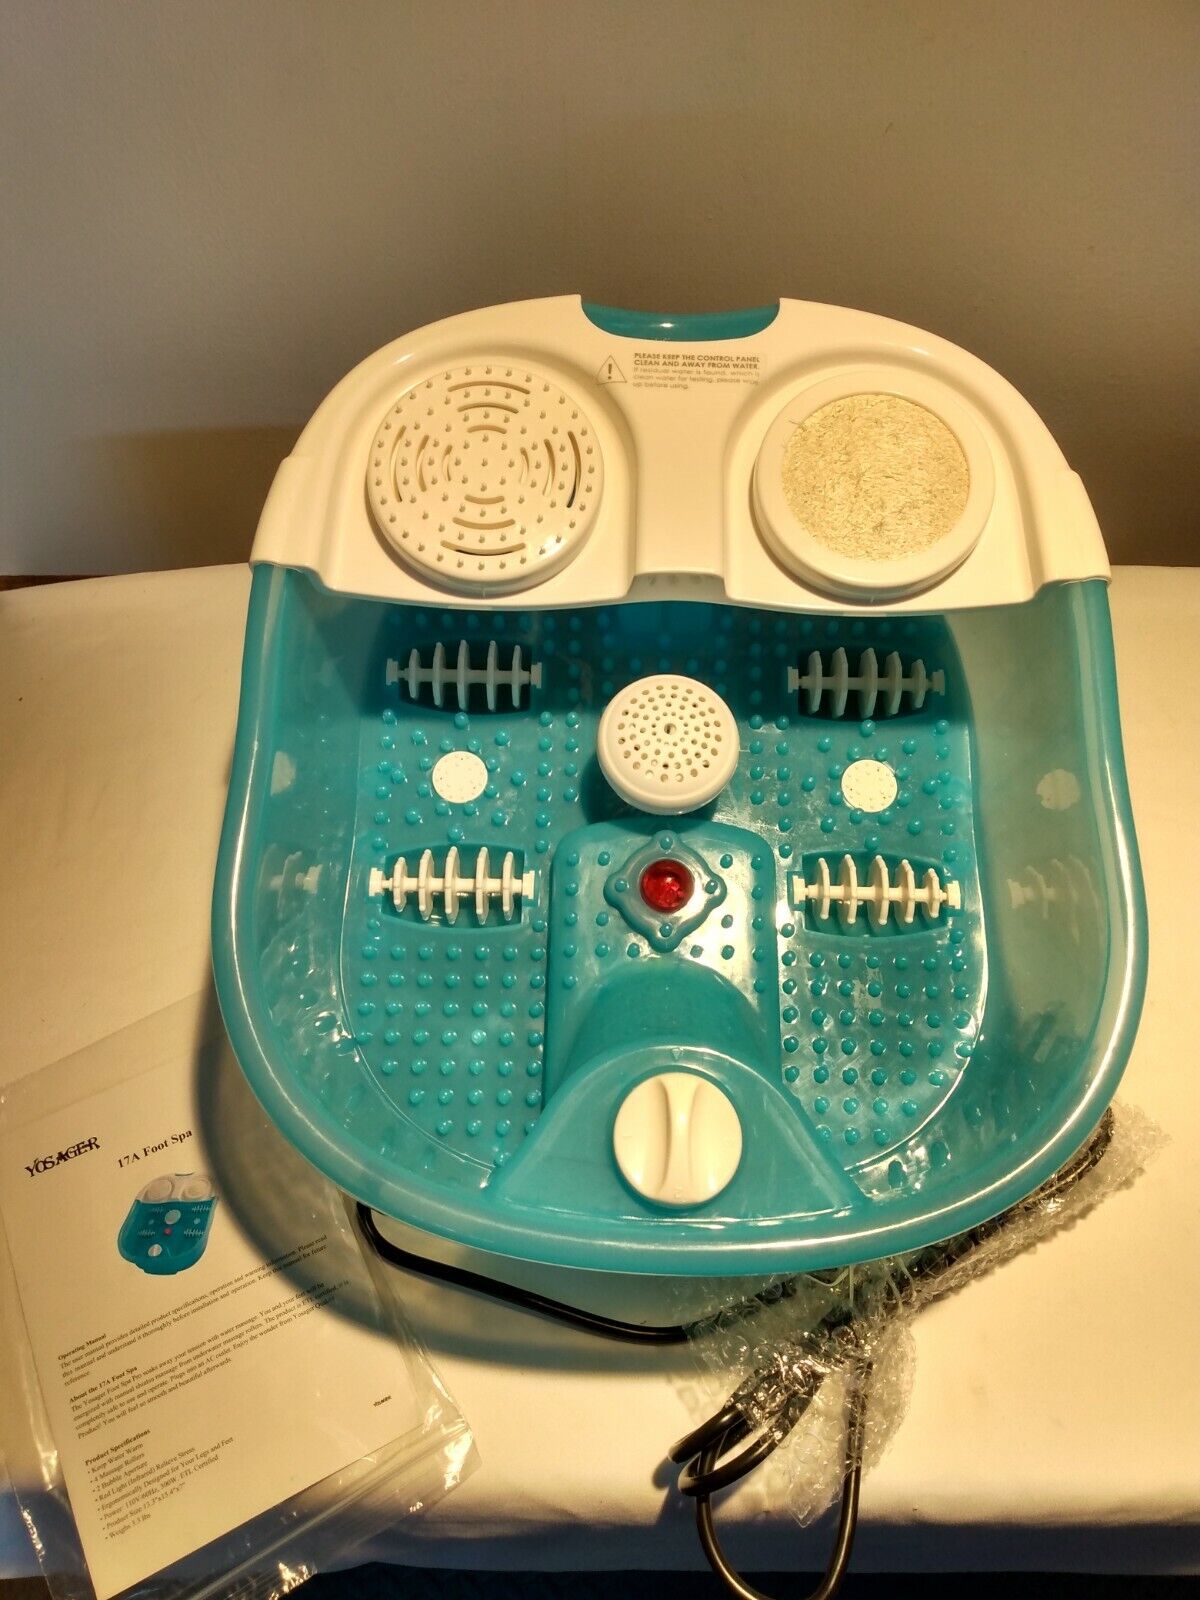 Yosager Foot Spa with Heat, Bubbles and Manual Foot Massager